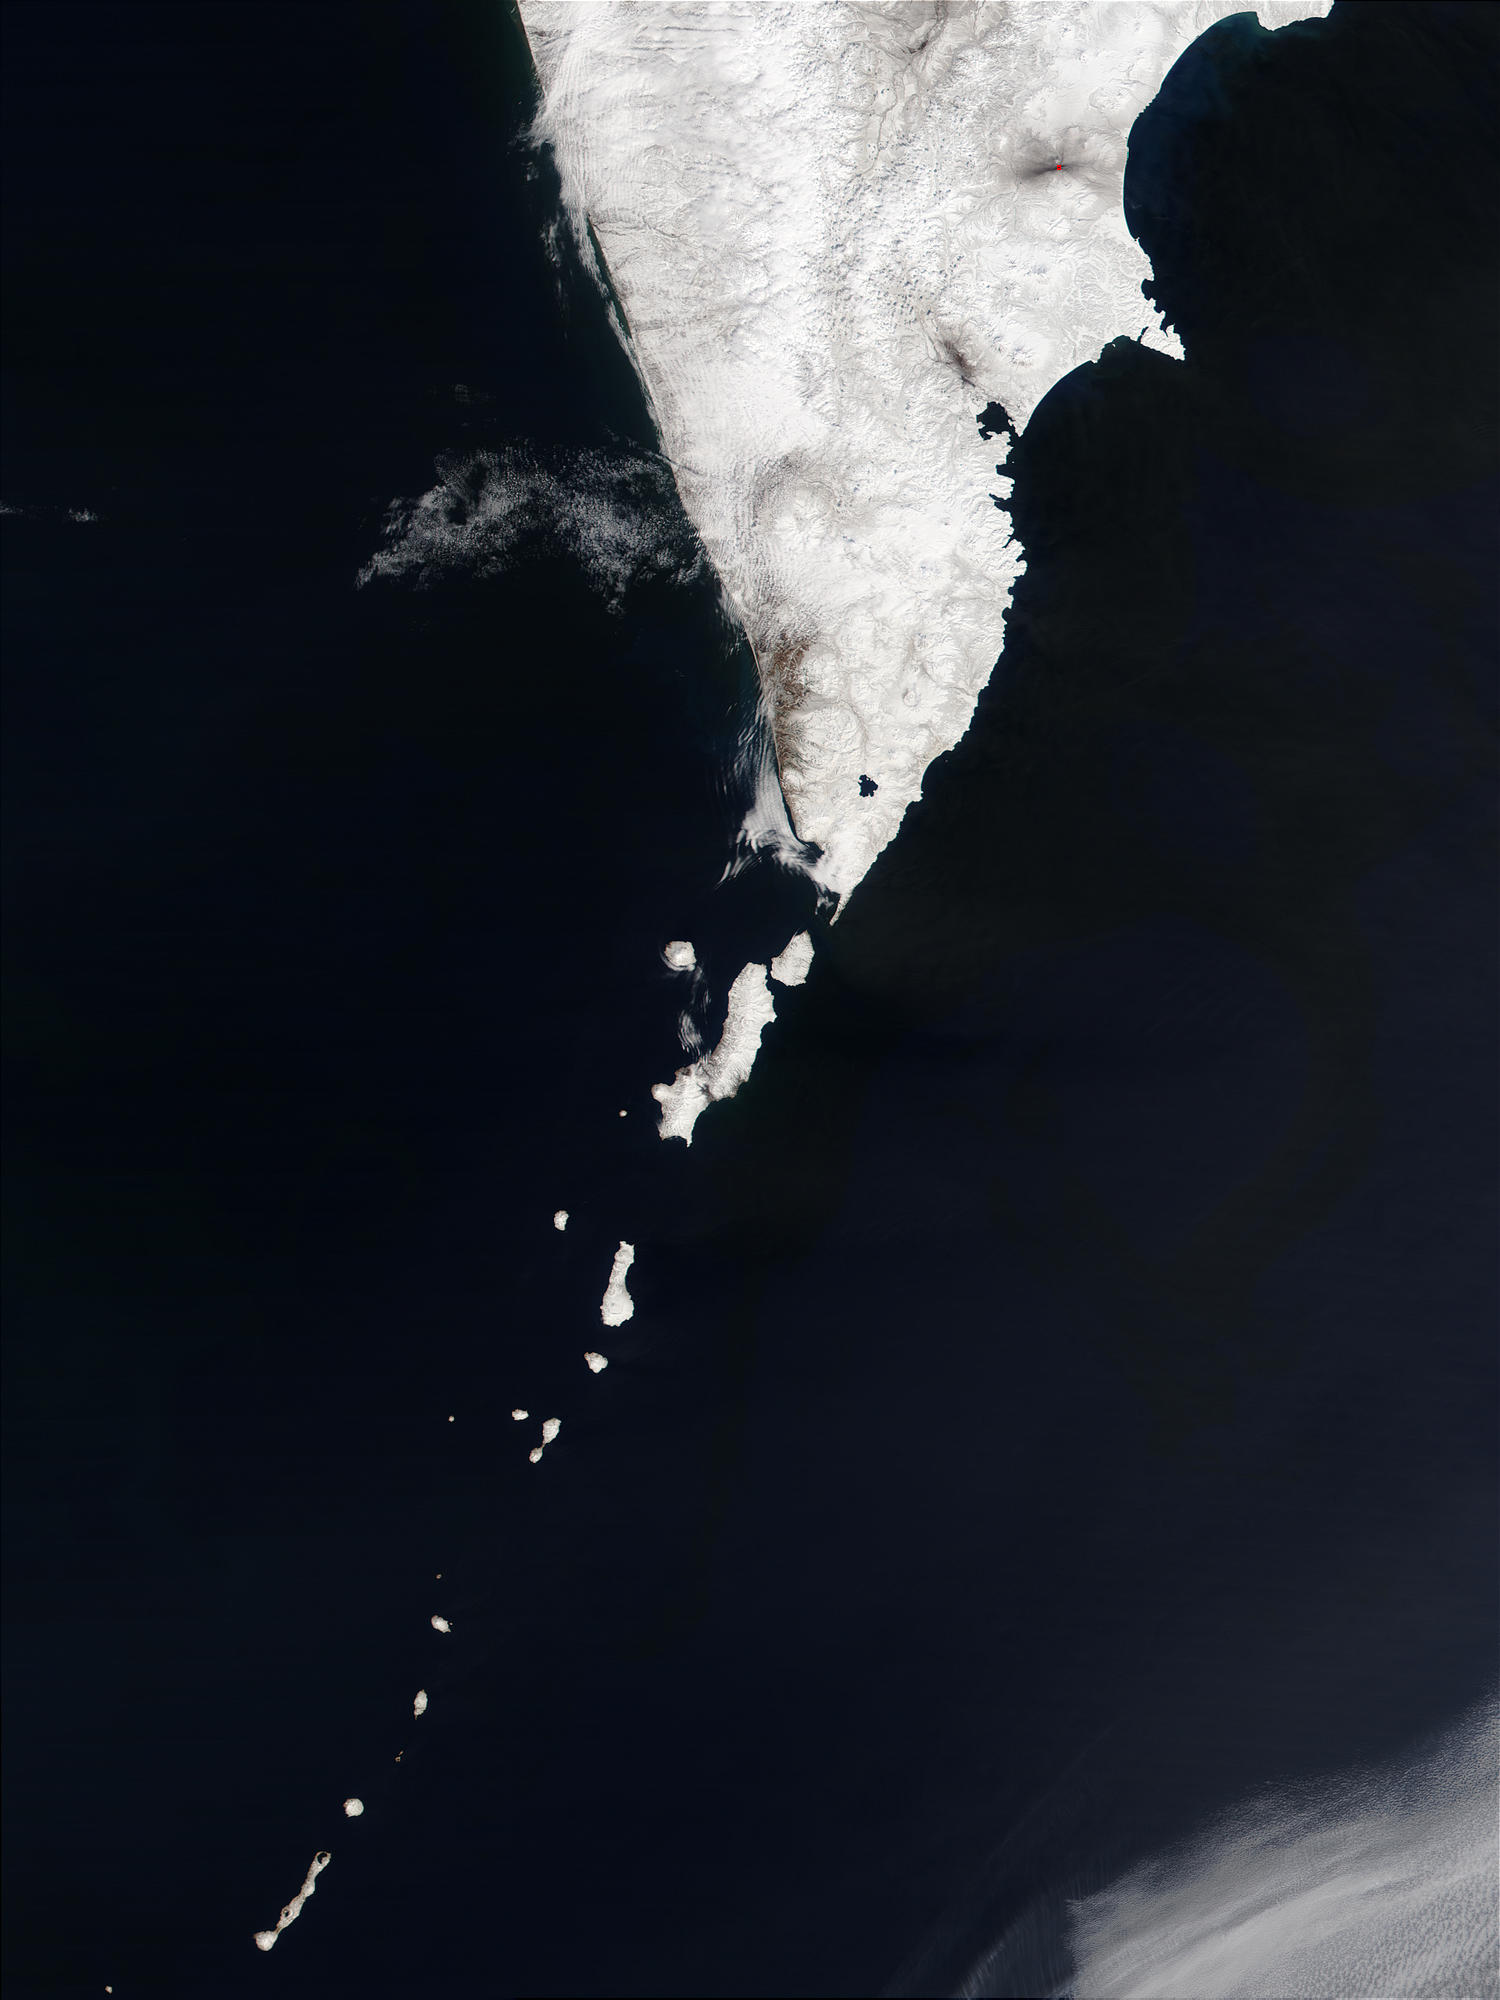 Kamchatka Peninsula and Kuril Islands, Russia - related image preview